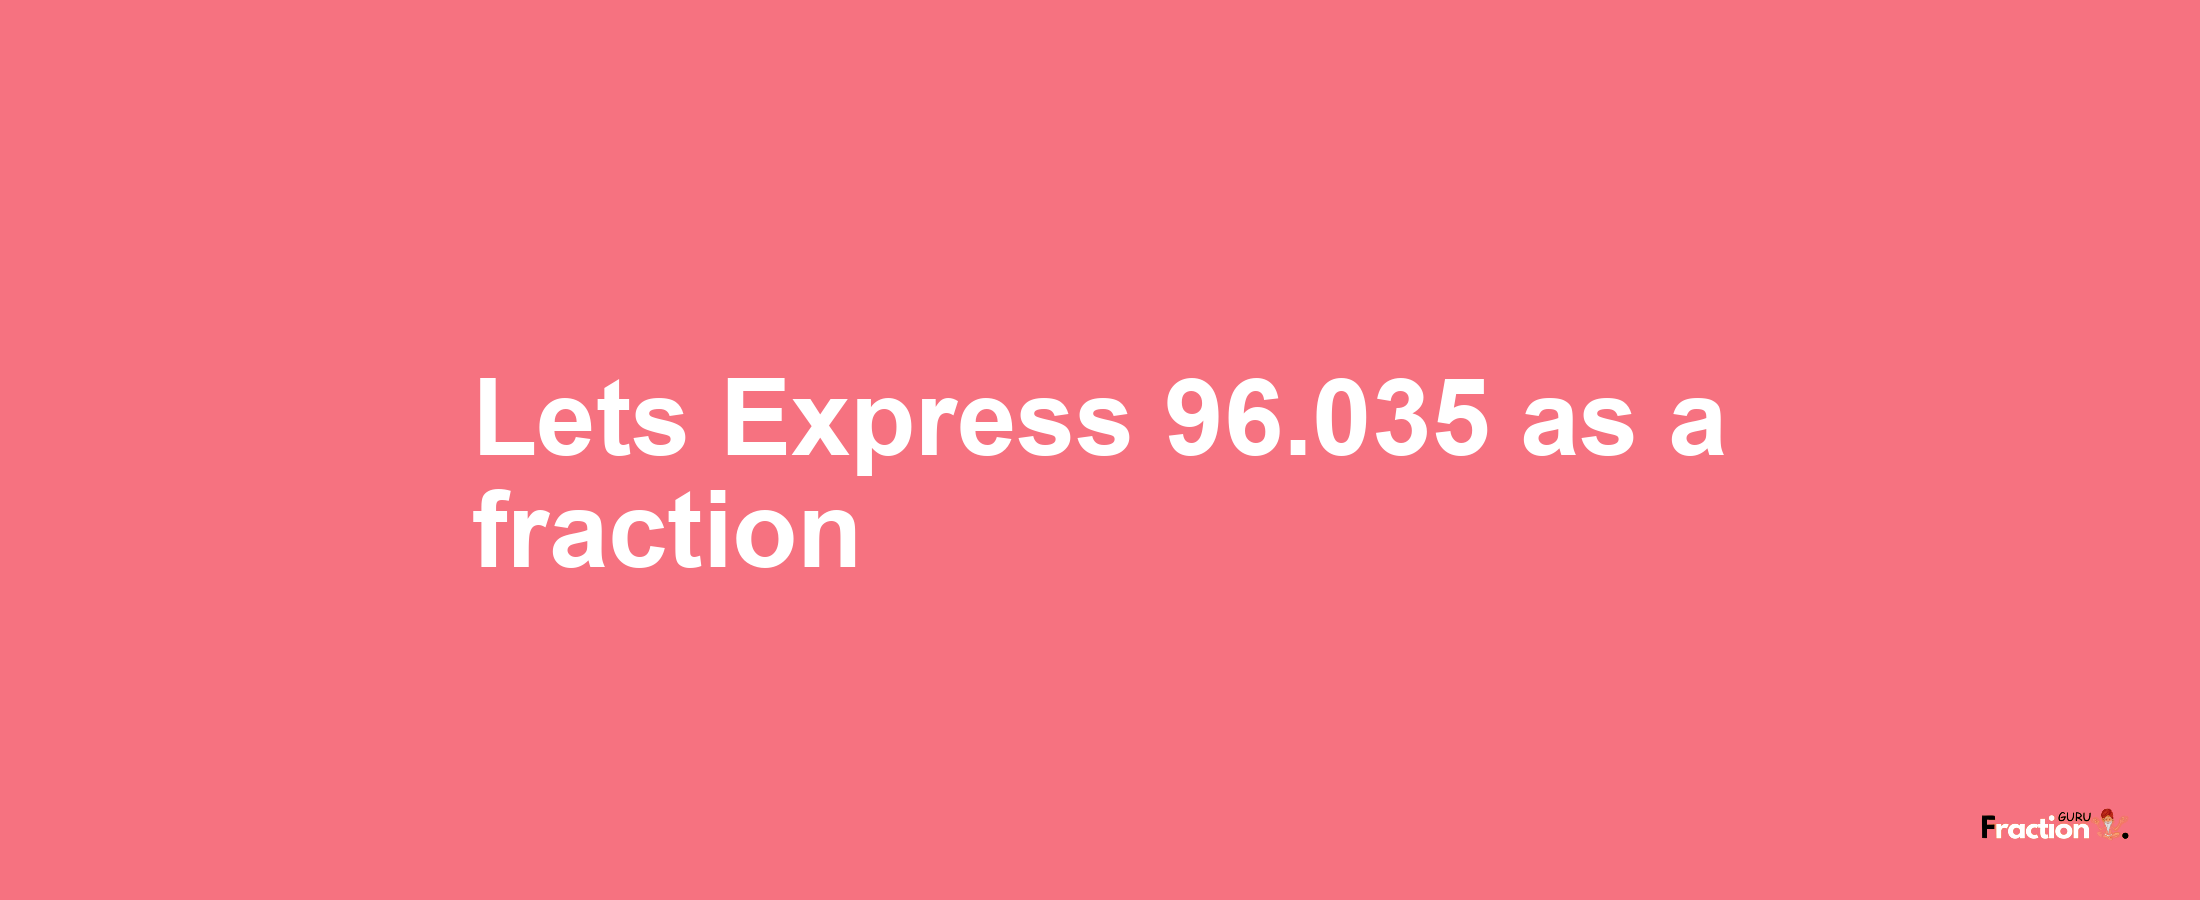 Lets Express 96.035 as afraction